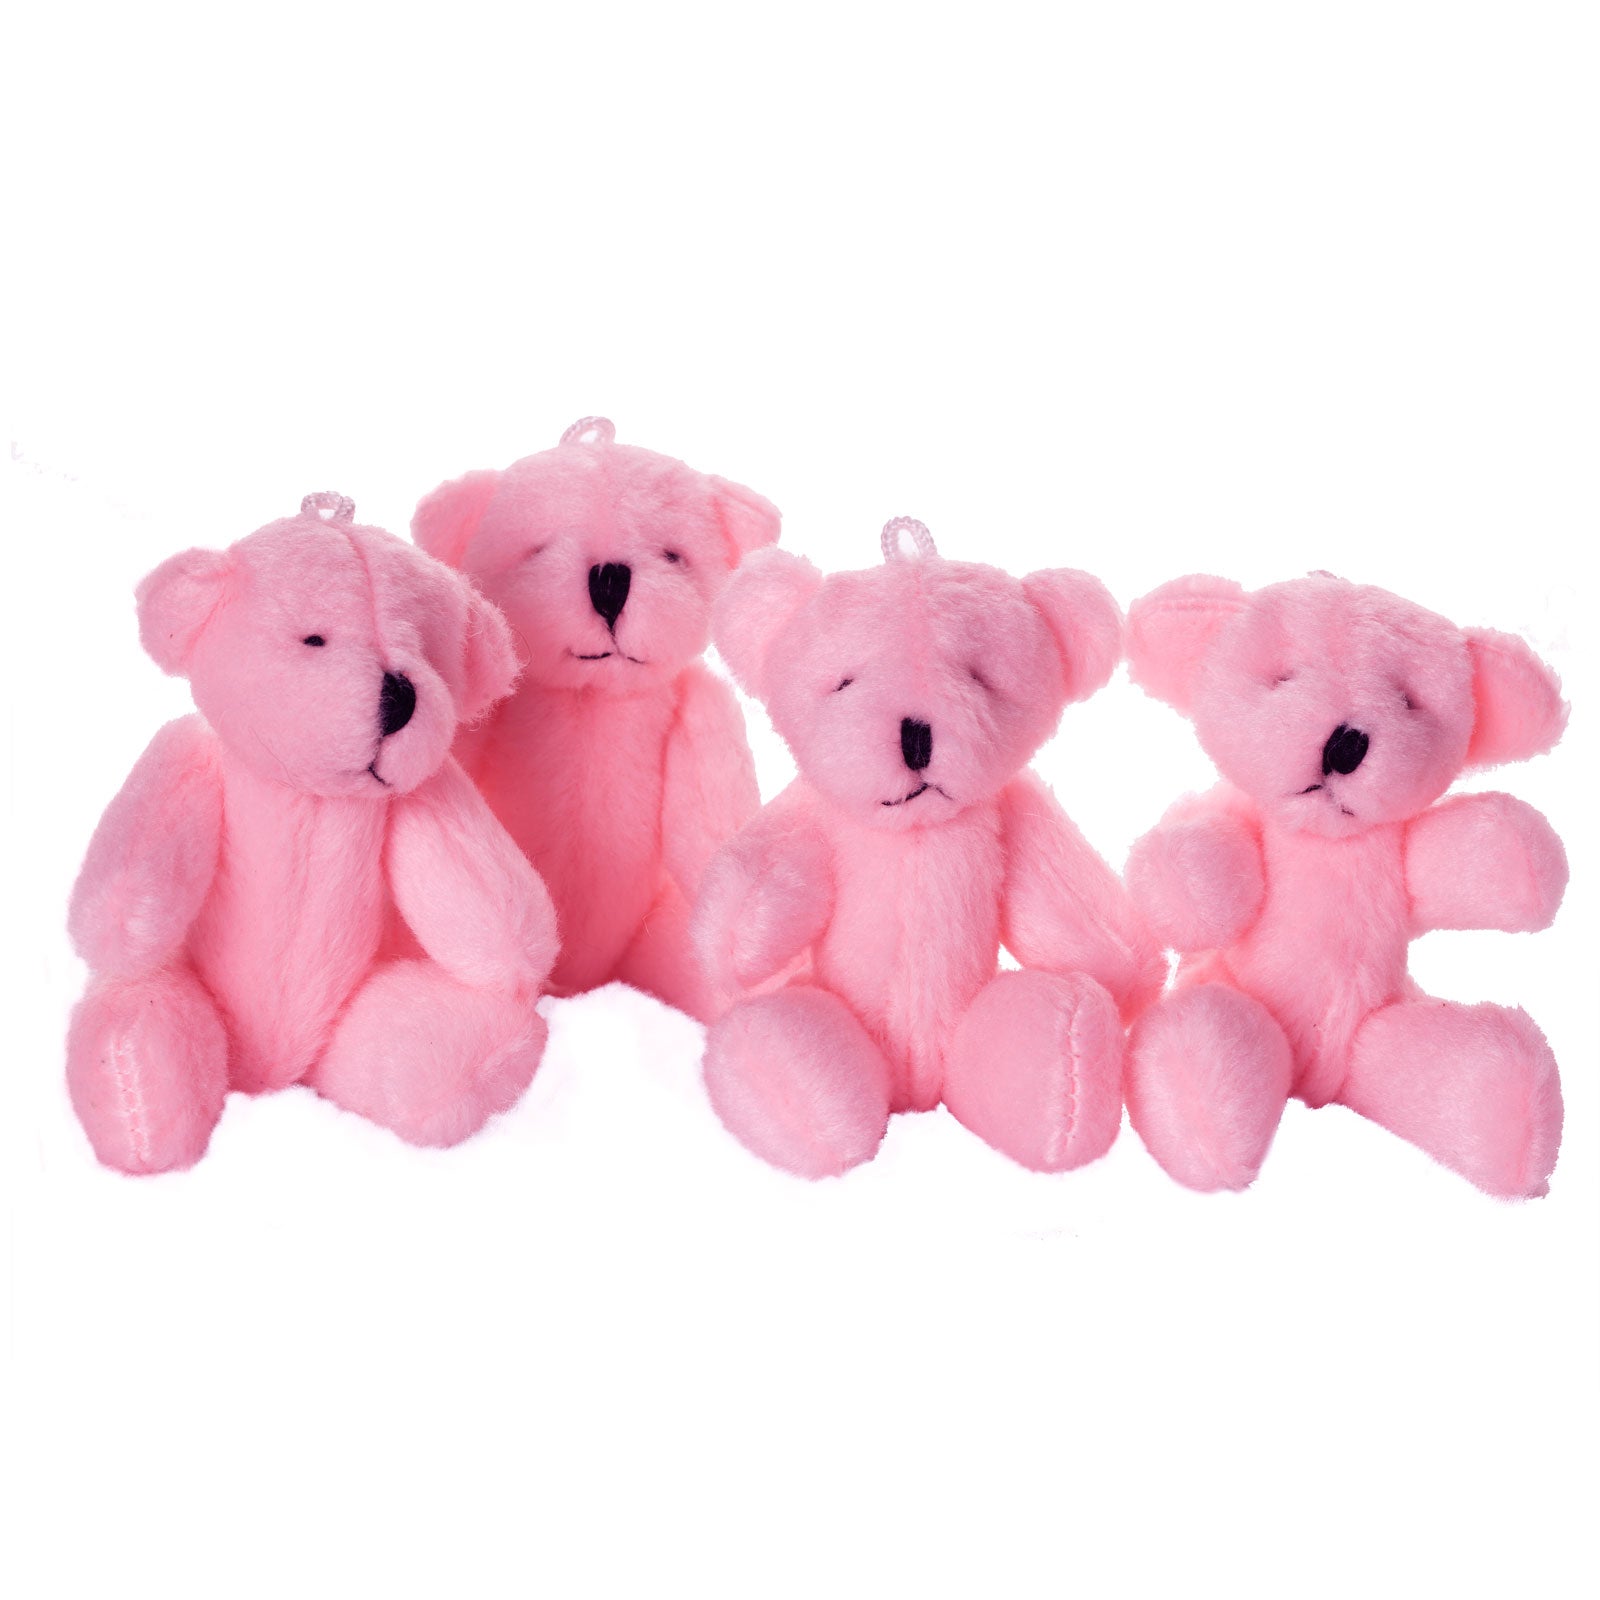 Small PINK Teddy Bears X 65 - Cute Soft Adorable